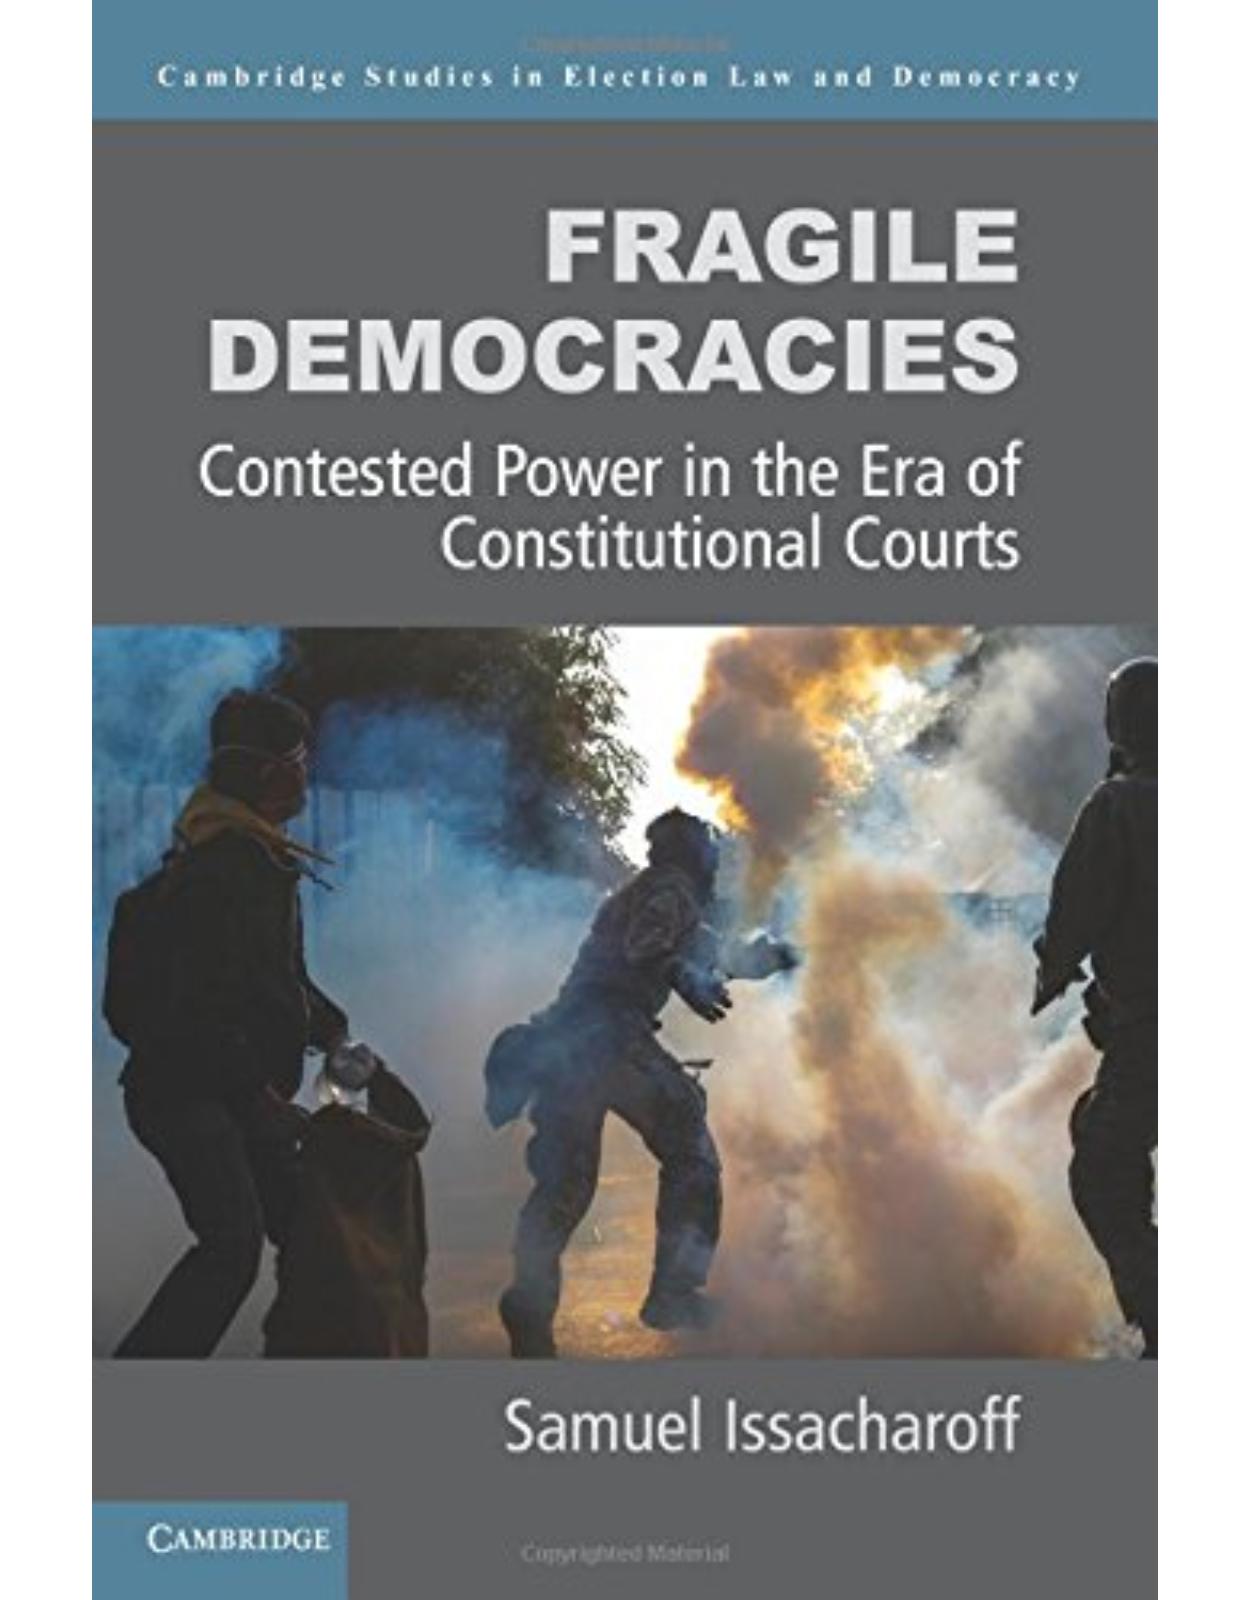 Fragile Democracies: Contested Power in the Era of Constitutional Courts (Cambridge Studies in Election Law and Democracy)